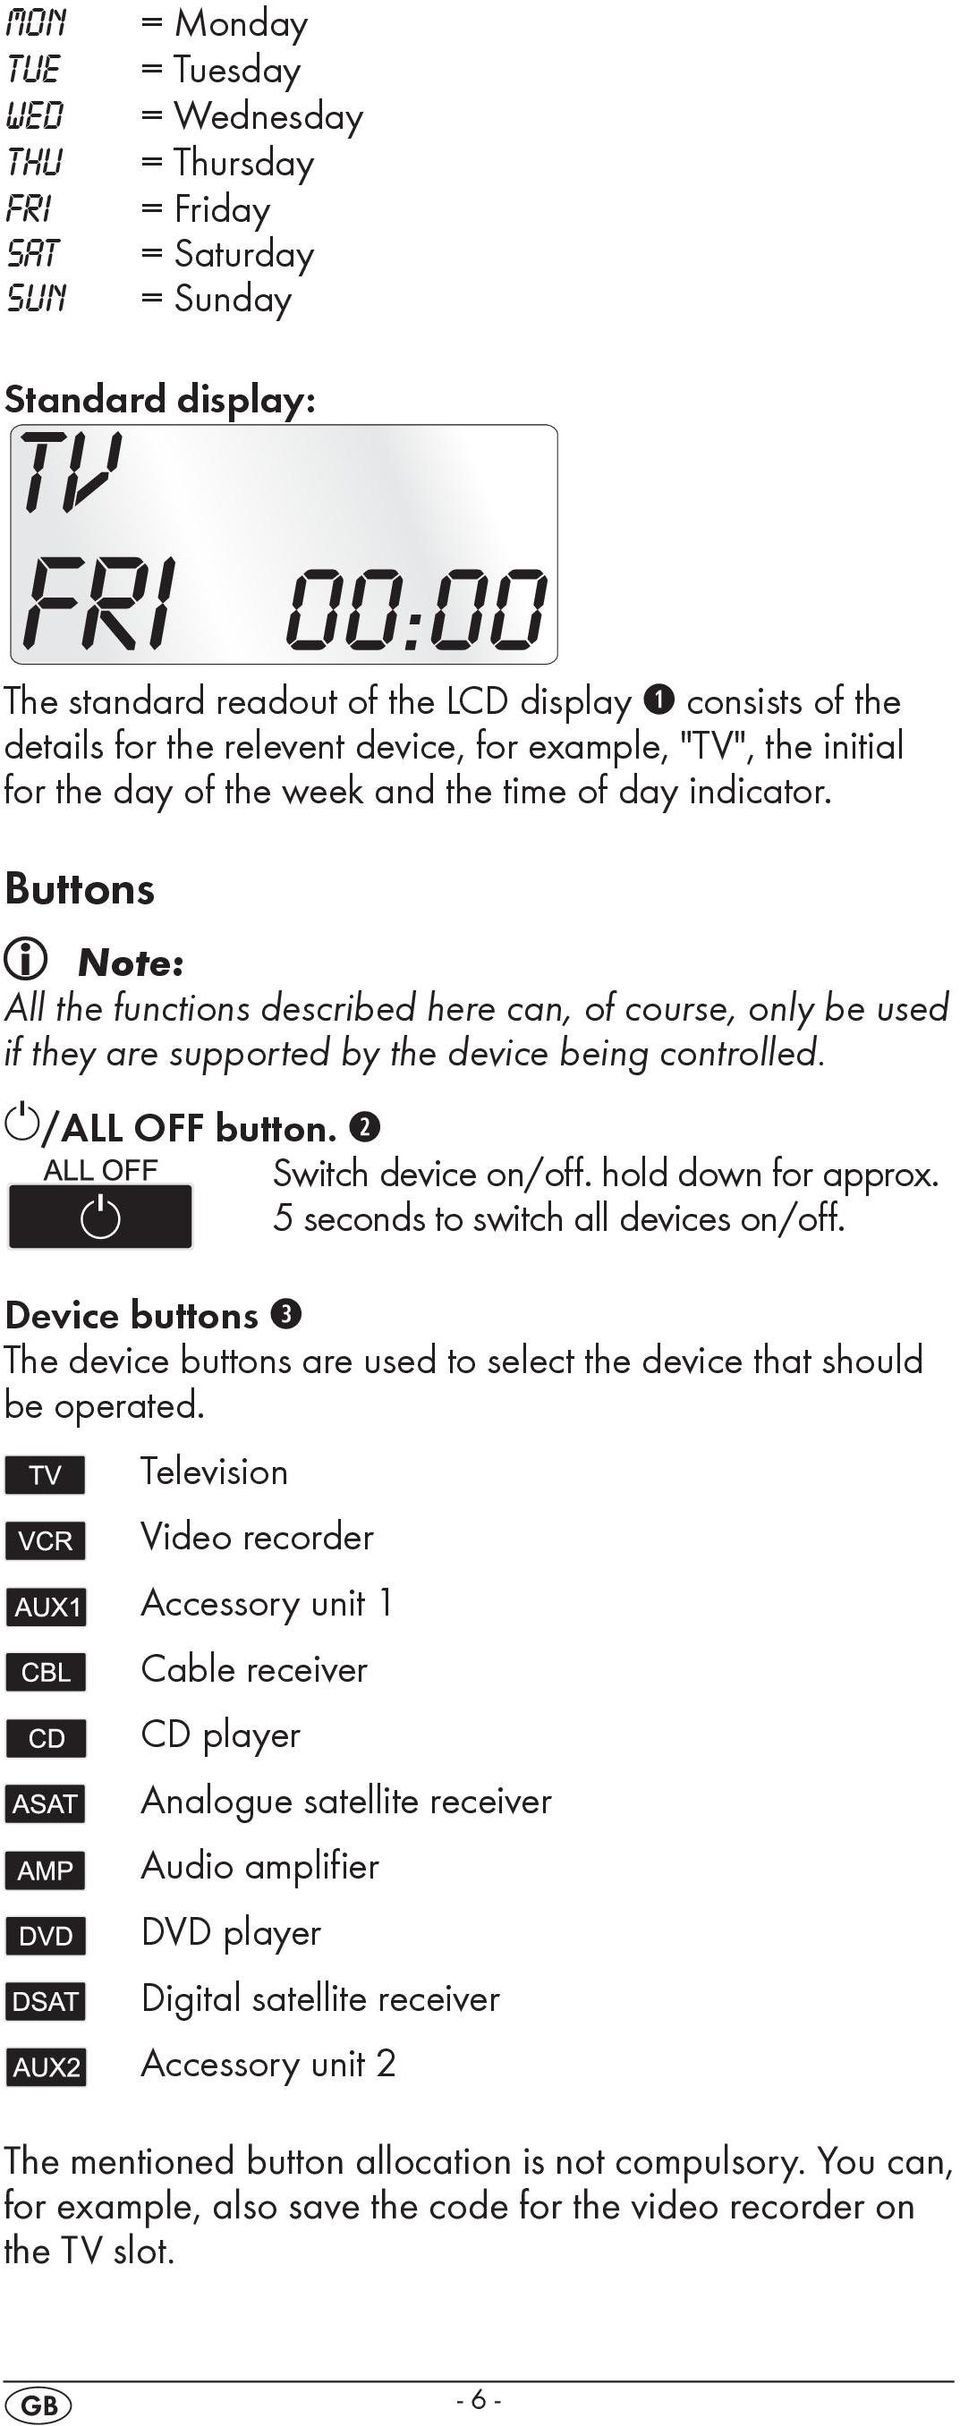 Buttons Note: All the functions described here can, of course, only be used if they are supported by the device being controlled. /ALL OFF button. w Switch device on/off. hold down for approx.